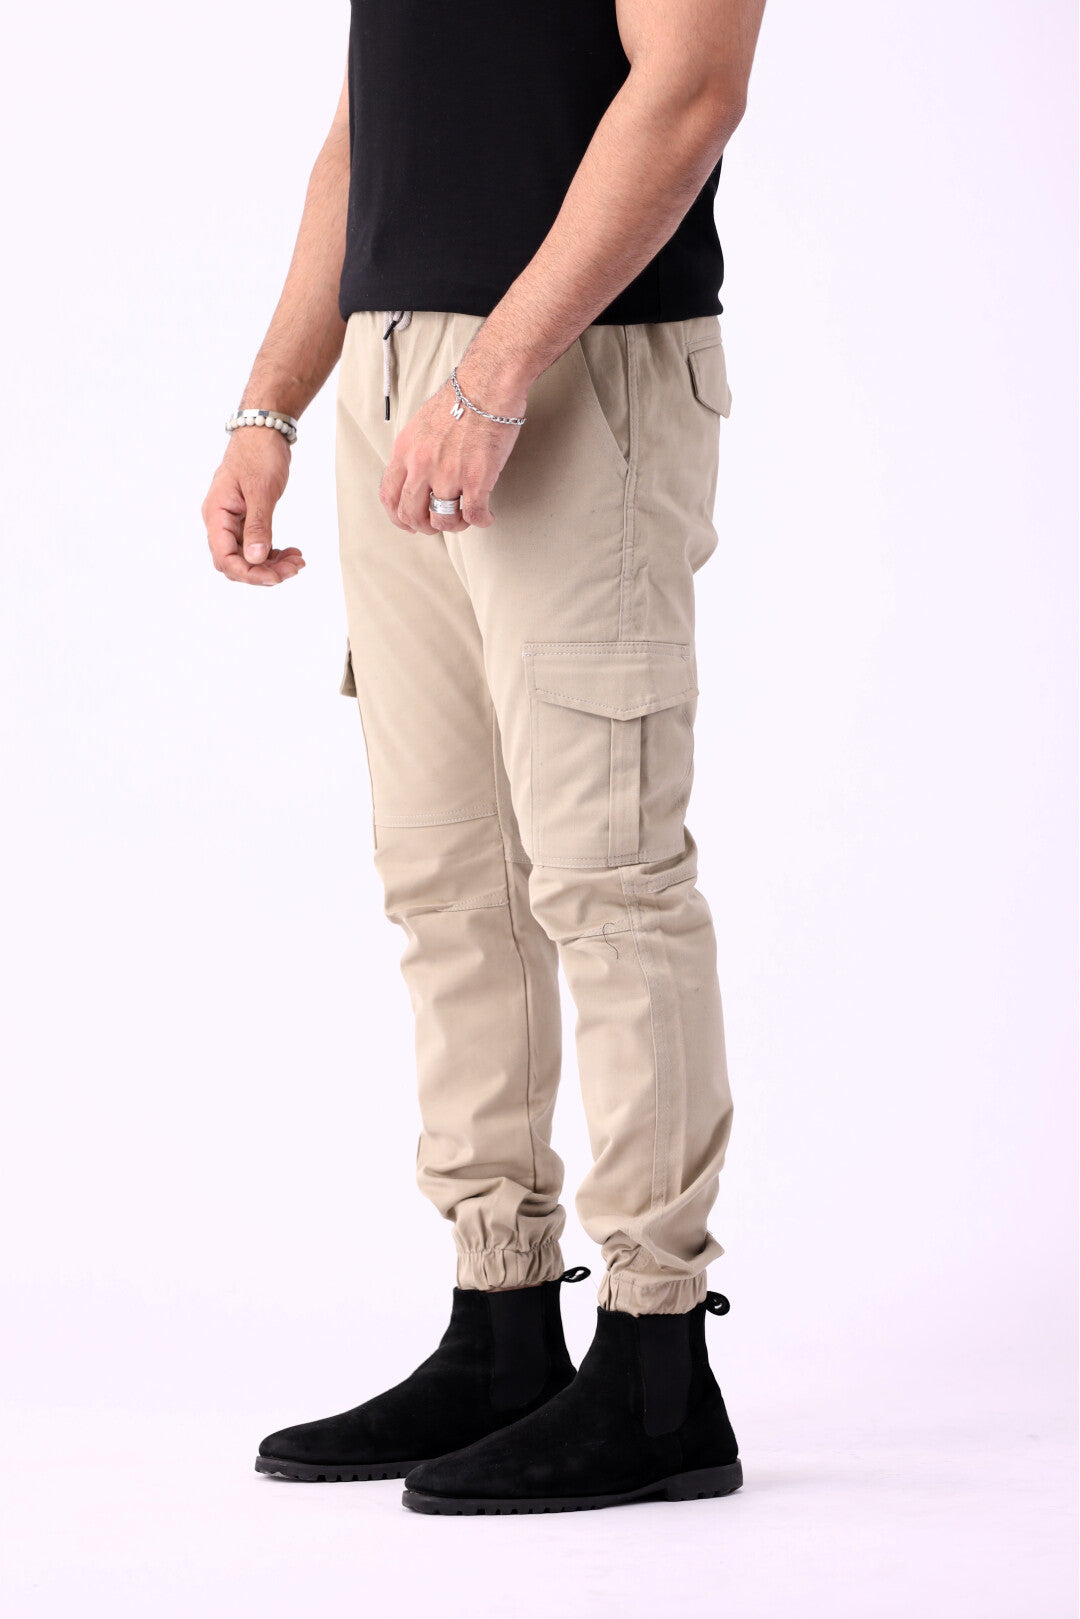 Bene Kleed Light Brown Loose Fit Cotton Parachute Cargo Trousers